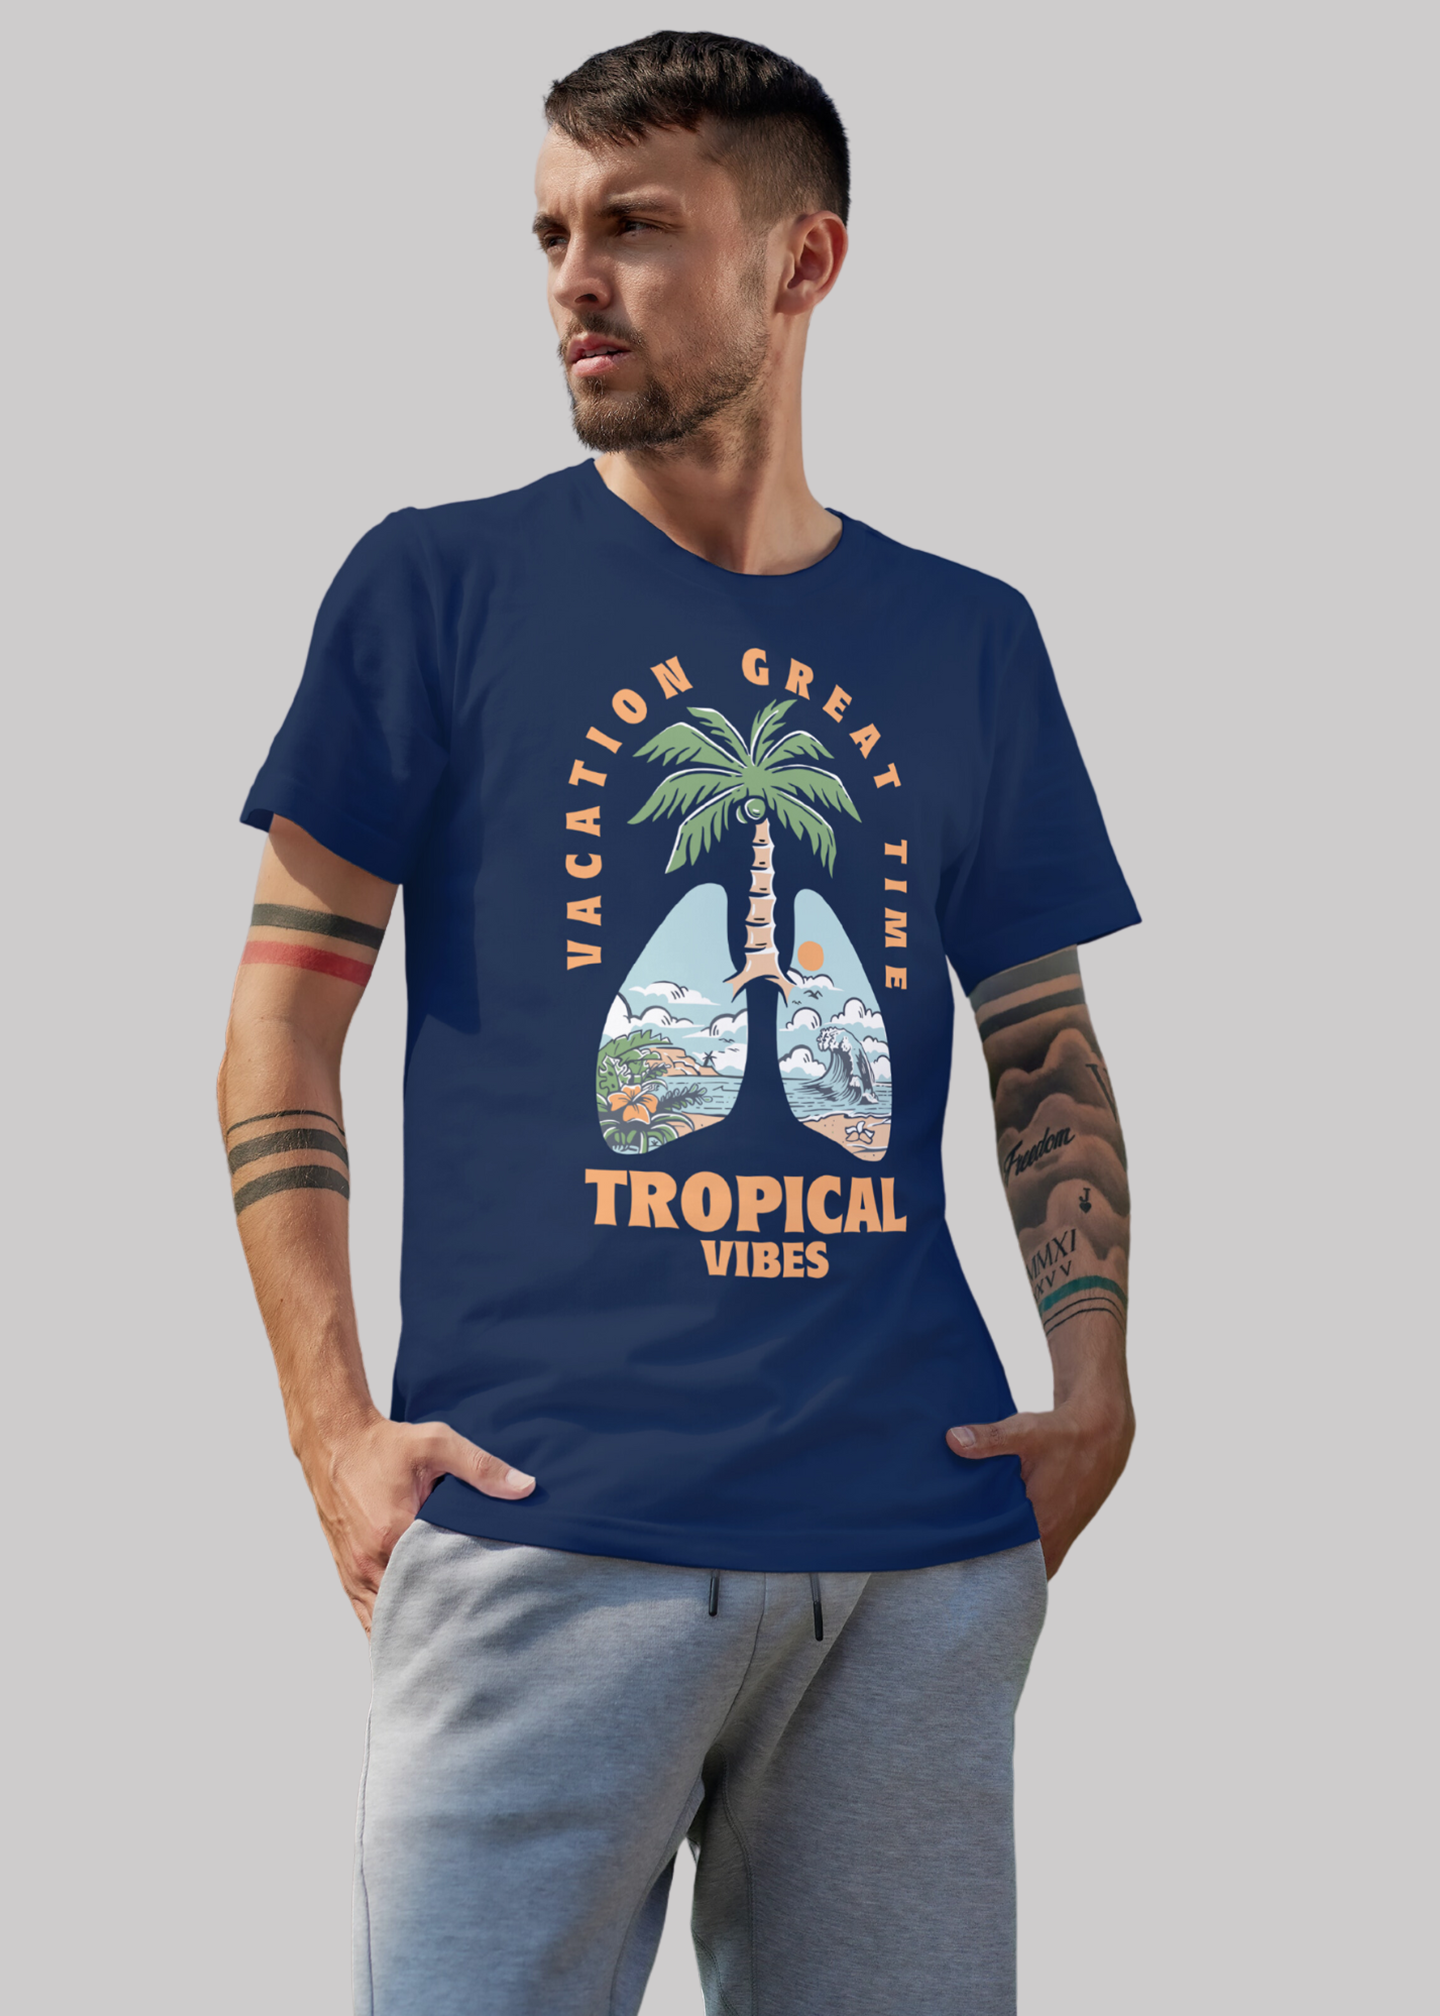 Vacation great times Printed Half Sleeve Premium Cotton T-shirt For Men